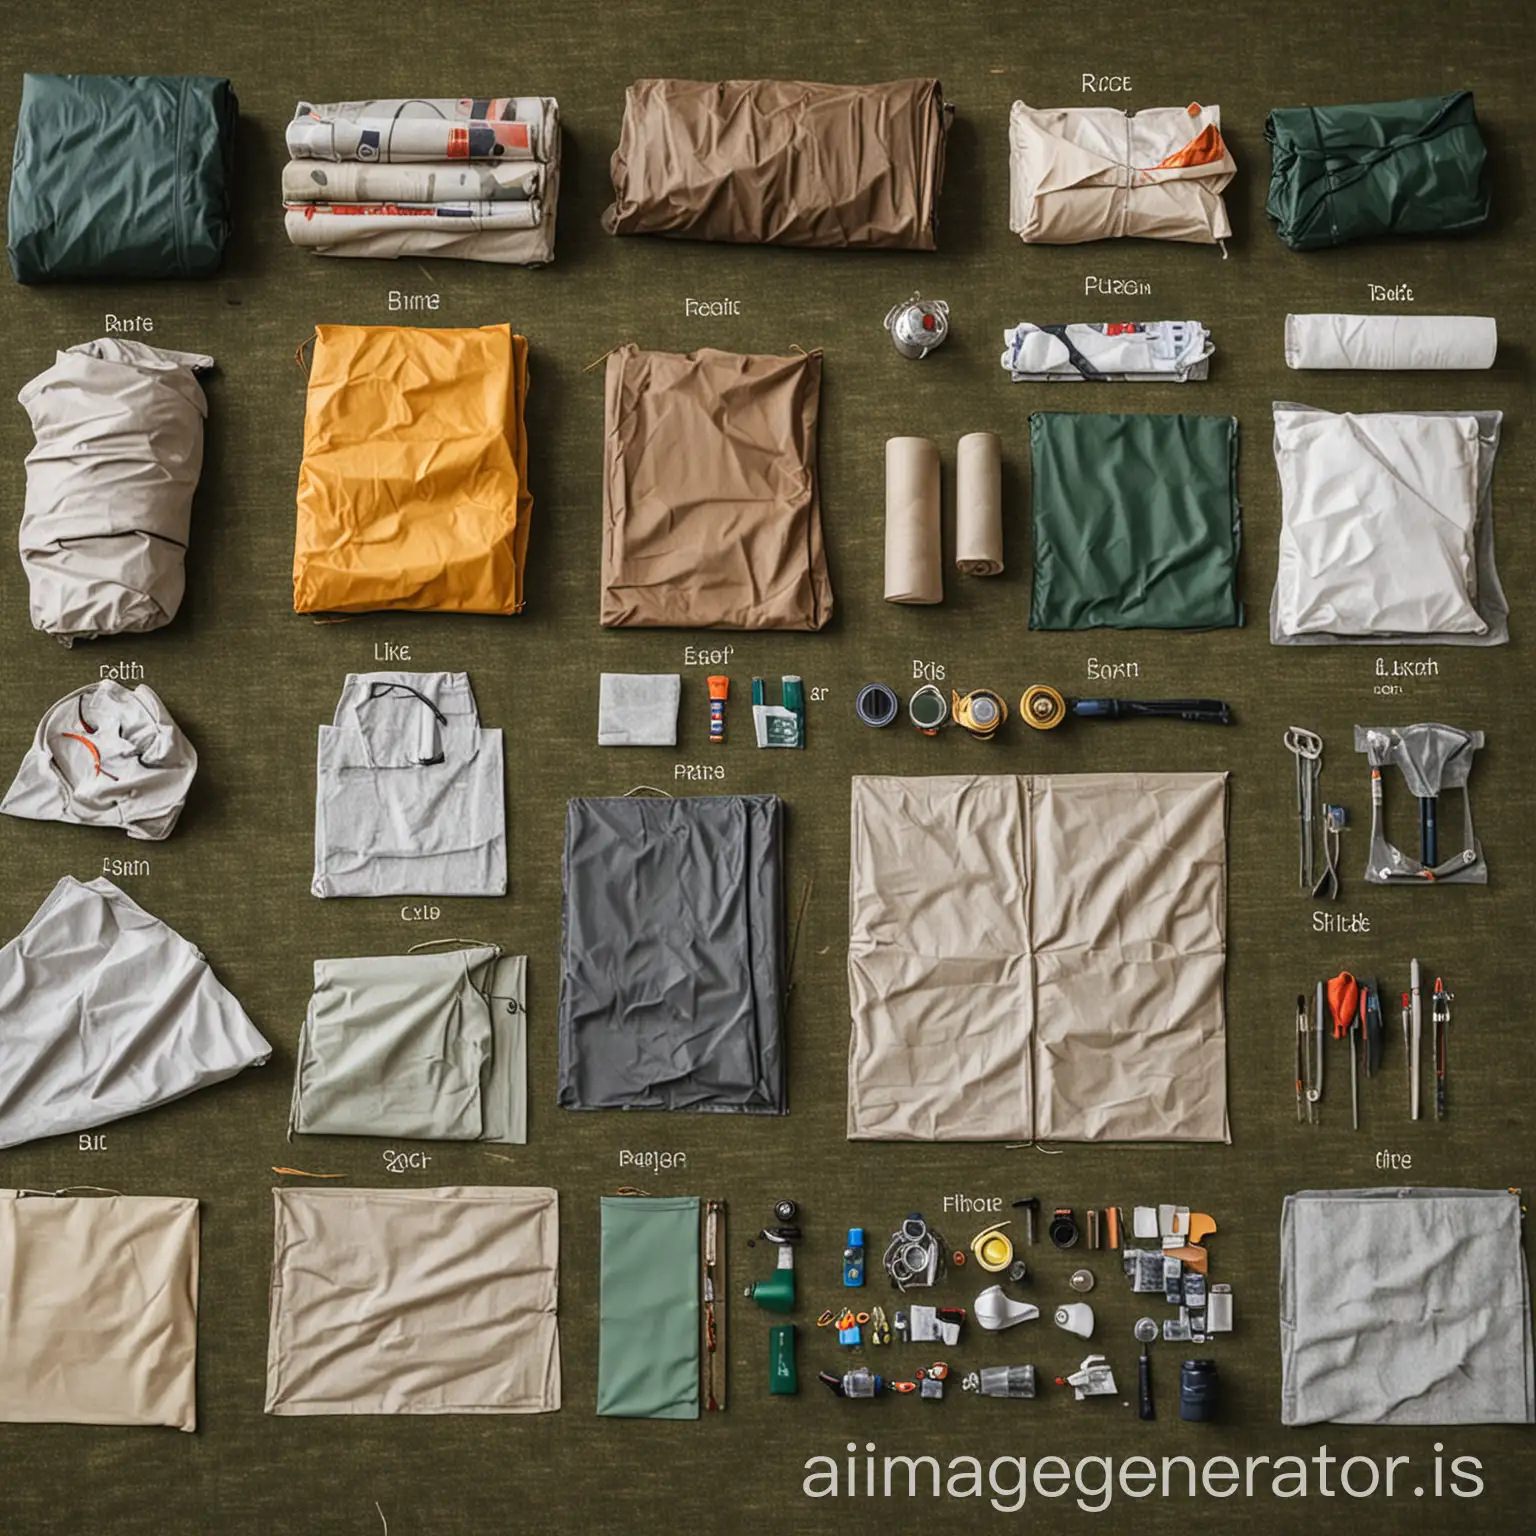 The image shows a variety of camping tent materials laid out on a table. The materials include waterproof fabrics, lightweight but durable textiles, and flexible yet strong materials. Each material is labeled with its properties and intended use in camping tent construction. This detailed image provides a visual representation of the factors influencing material choice in camping tent construction, showcasing the different options available to manufacturers and designers.